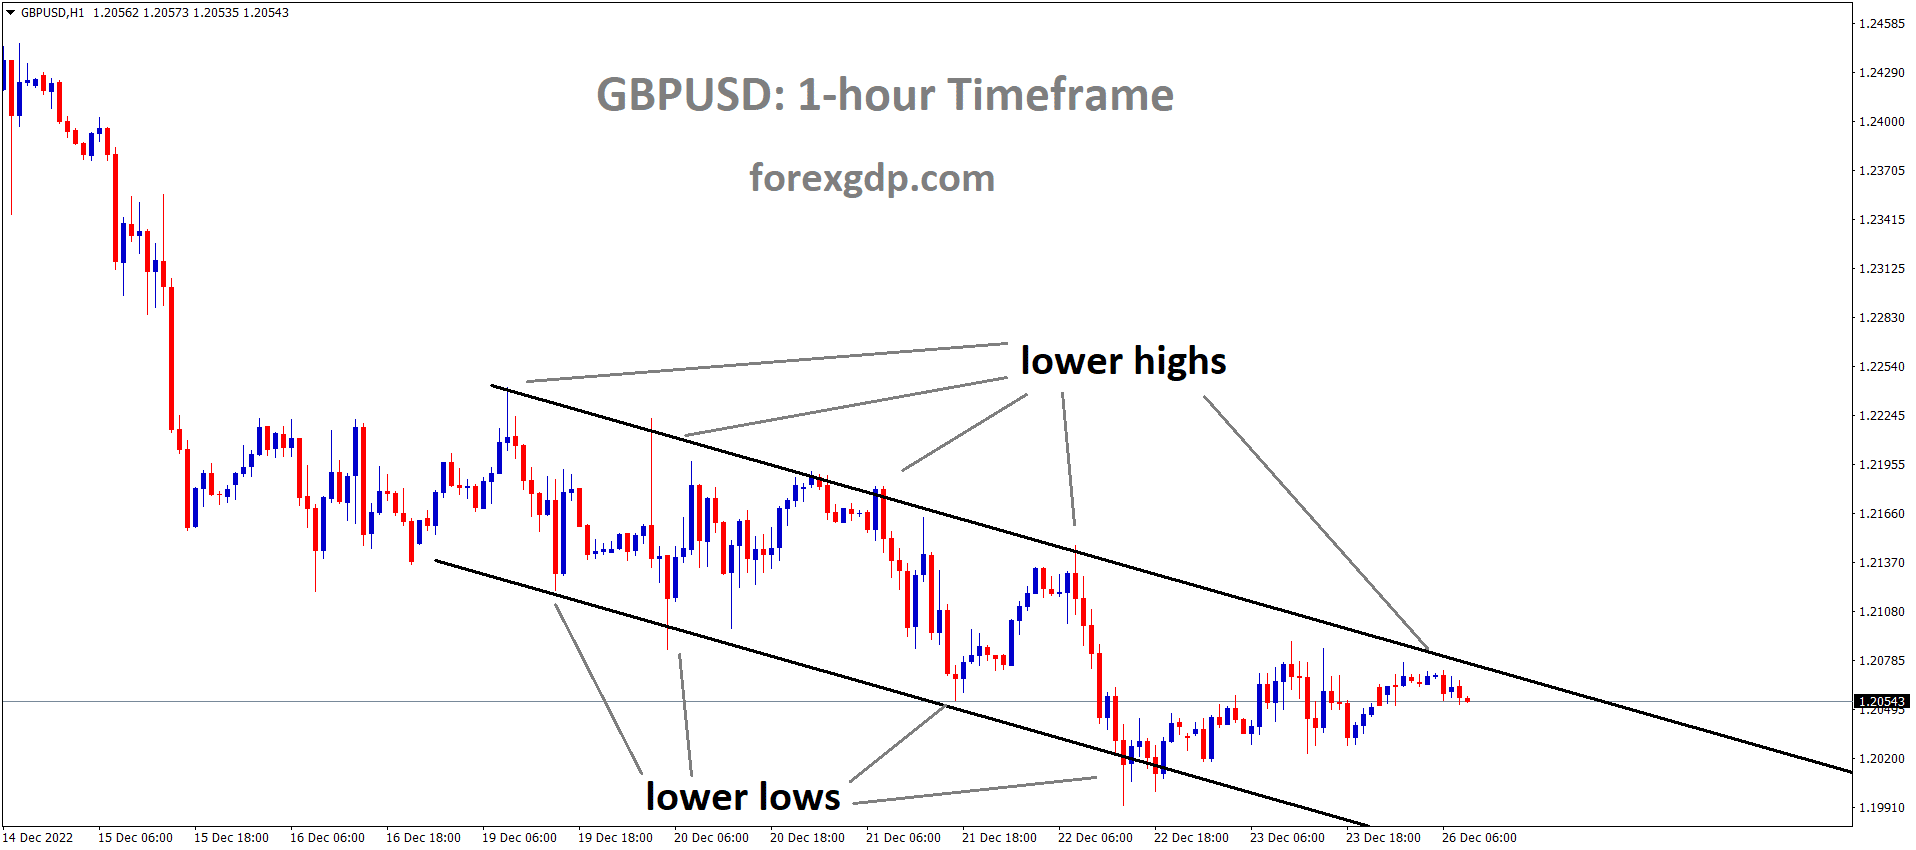 GBPUSD is moving in the Descending channel and the market has fallen from the lower high area of the channel 1